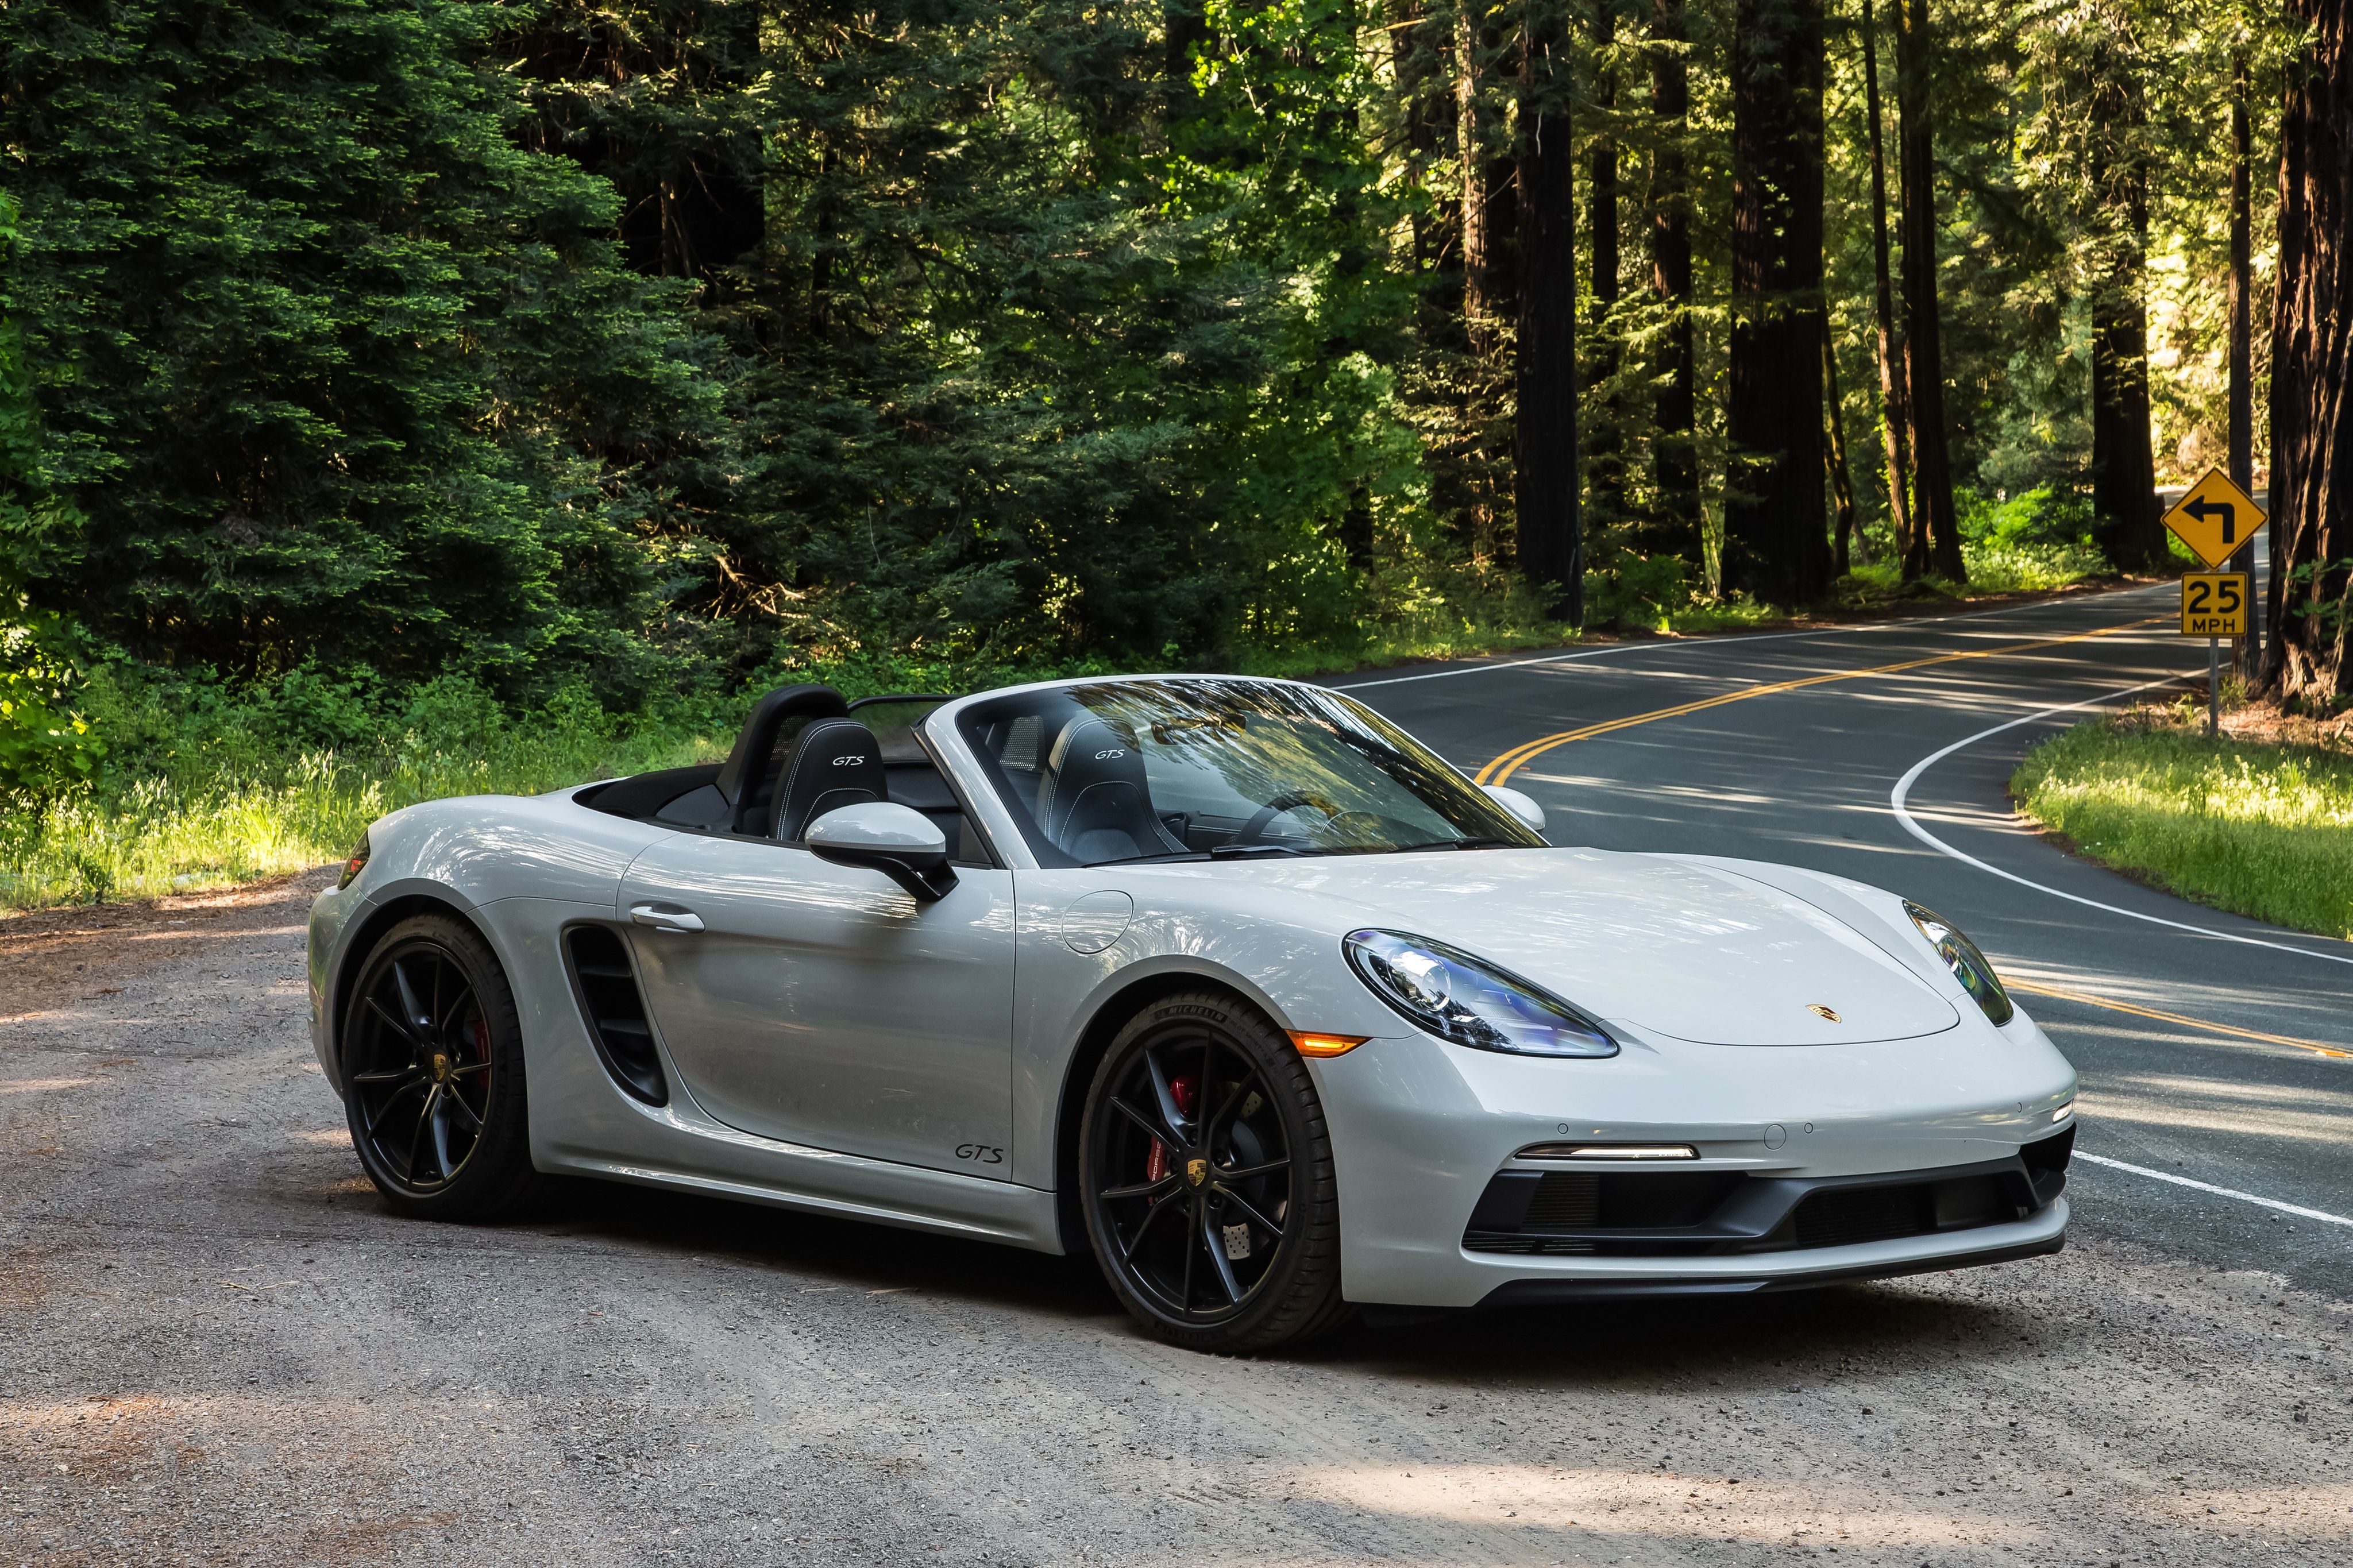 Light grey 2019 Porsche 718 Boxster convertible on a forest road